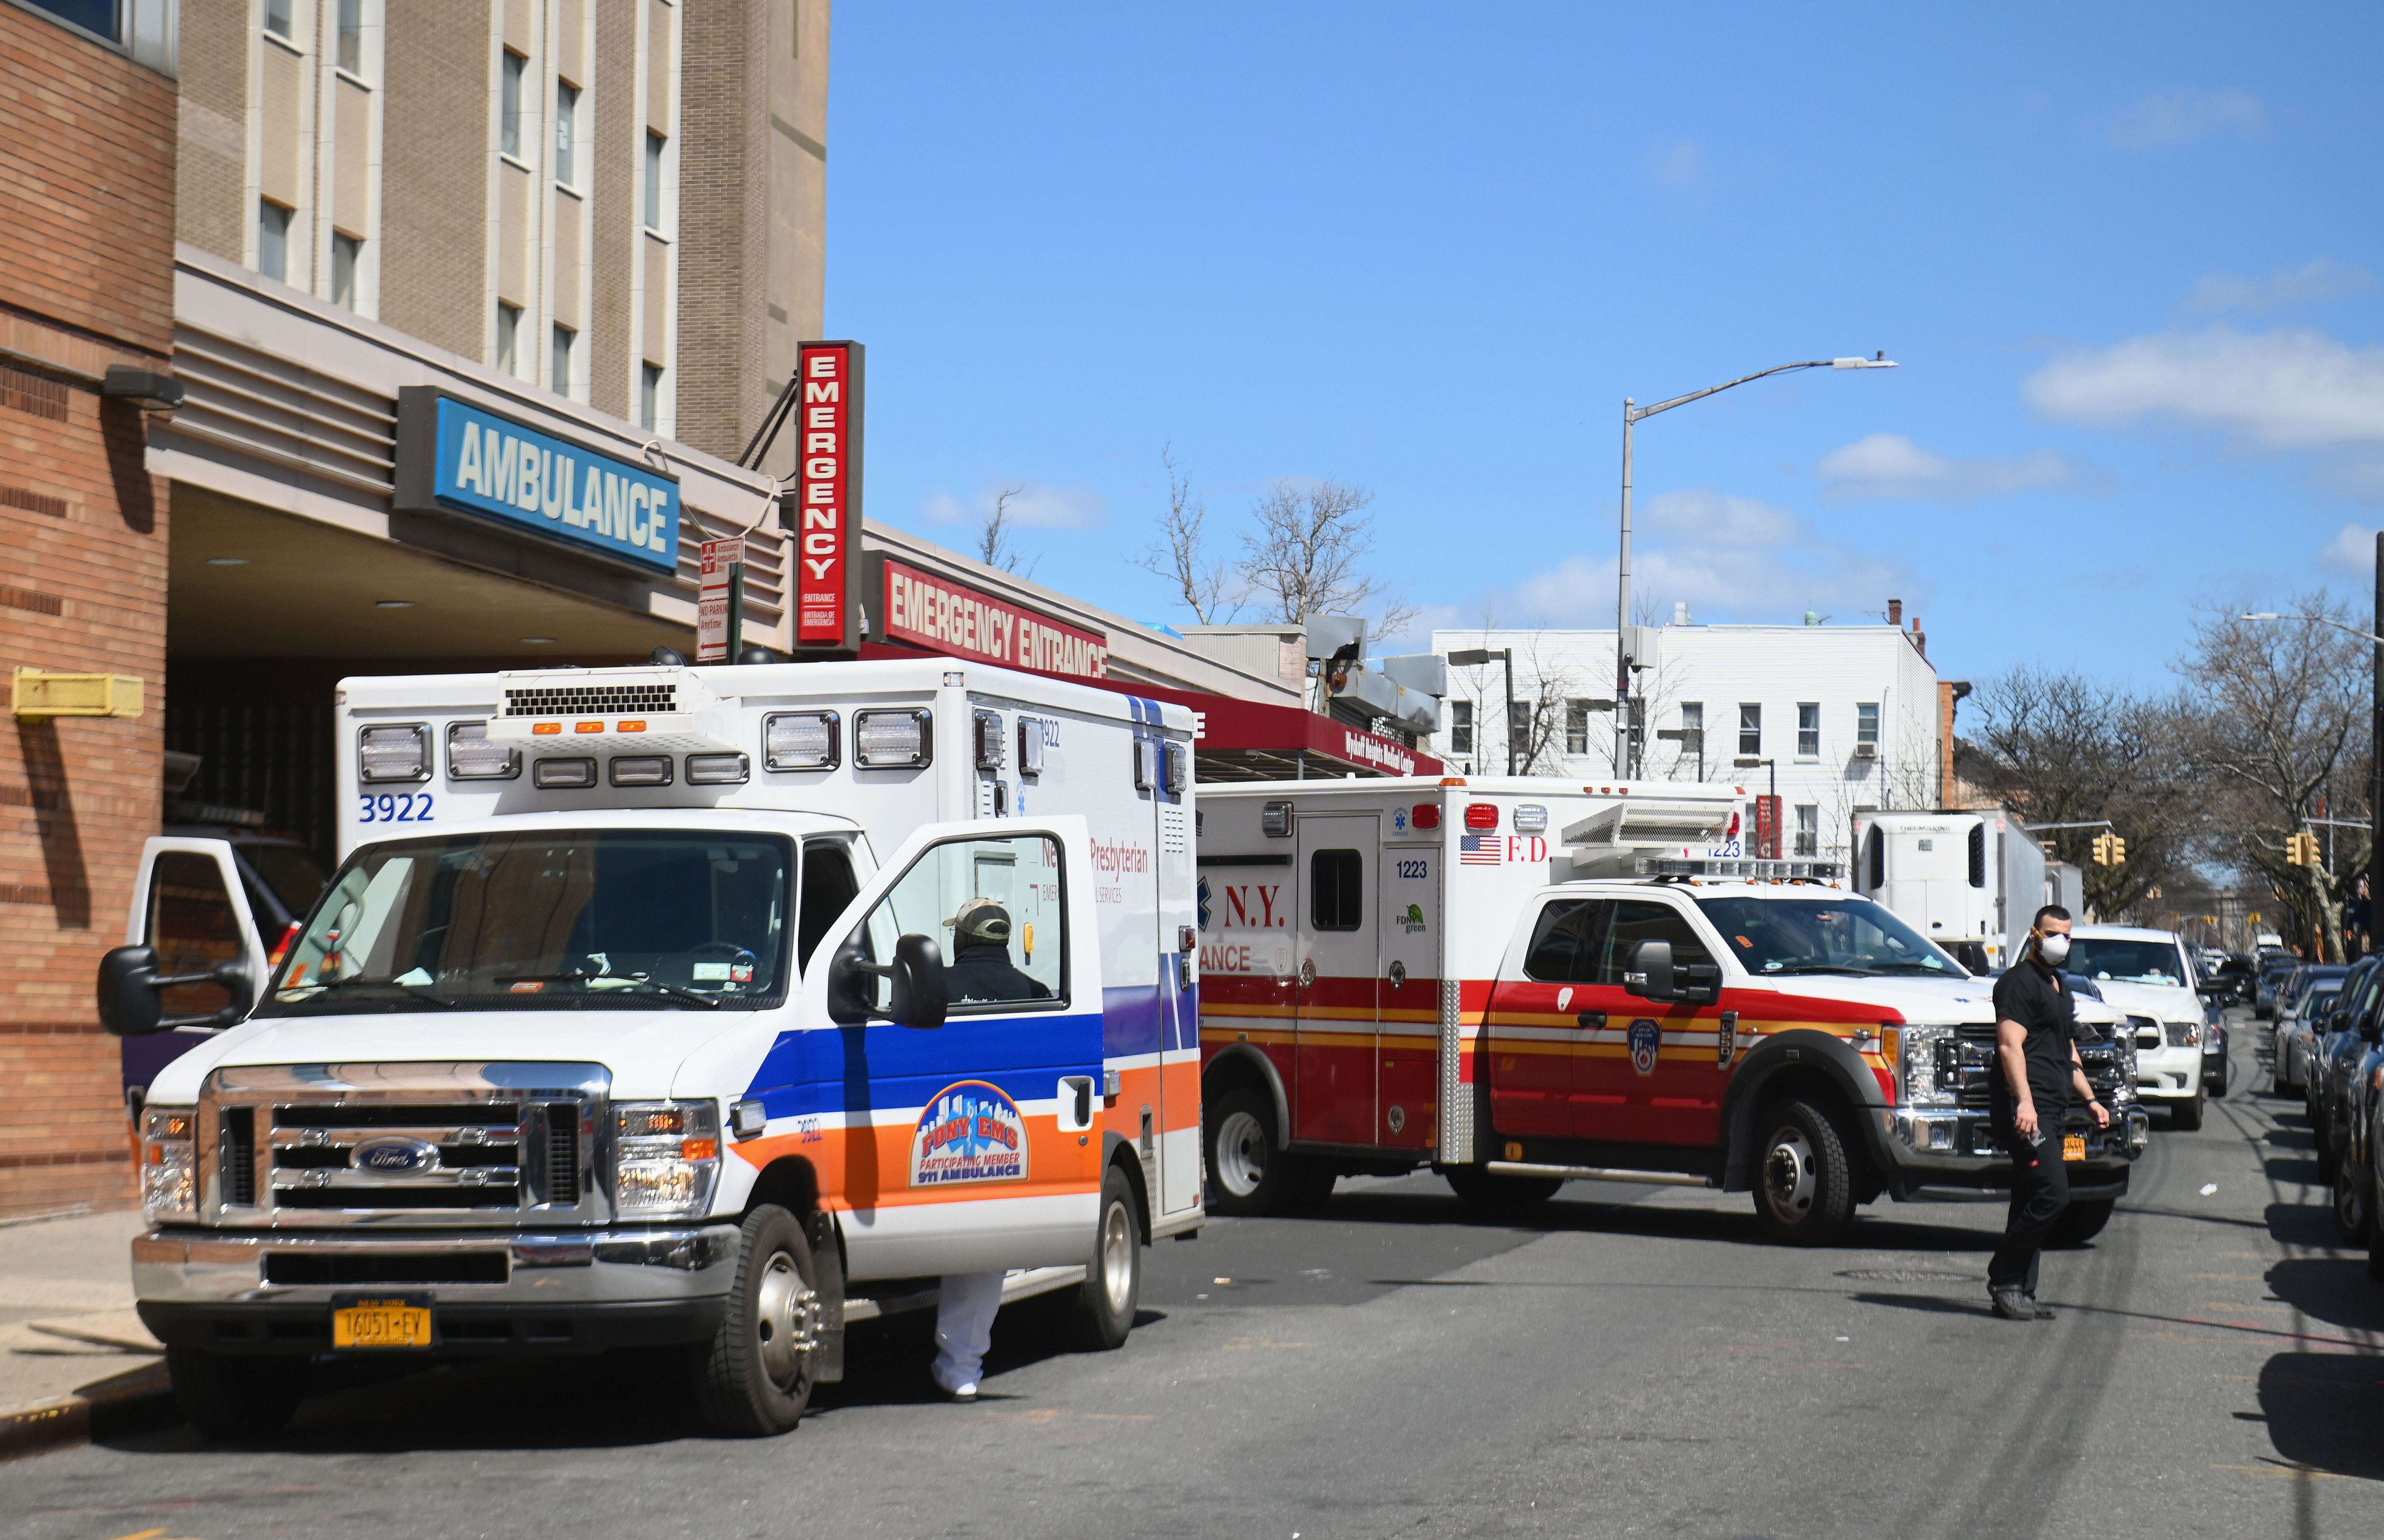 Ambulances in front of the emergency room entrance of the Wyckoff Heights Medical Center in Brooklyn on April 2, in New York.